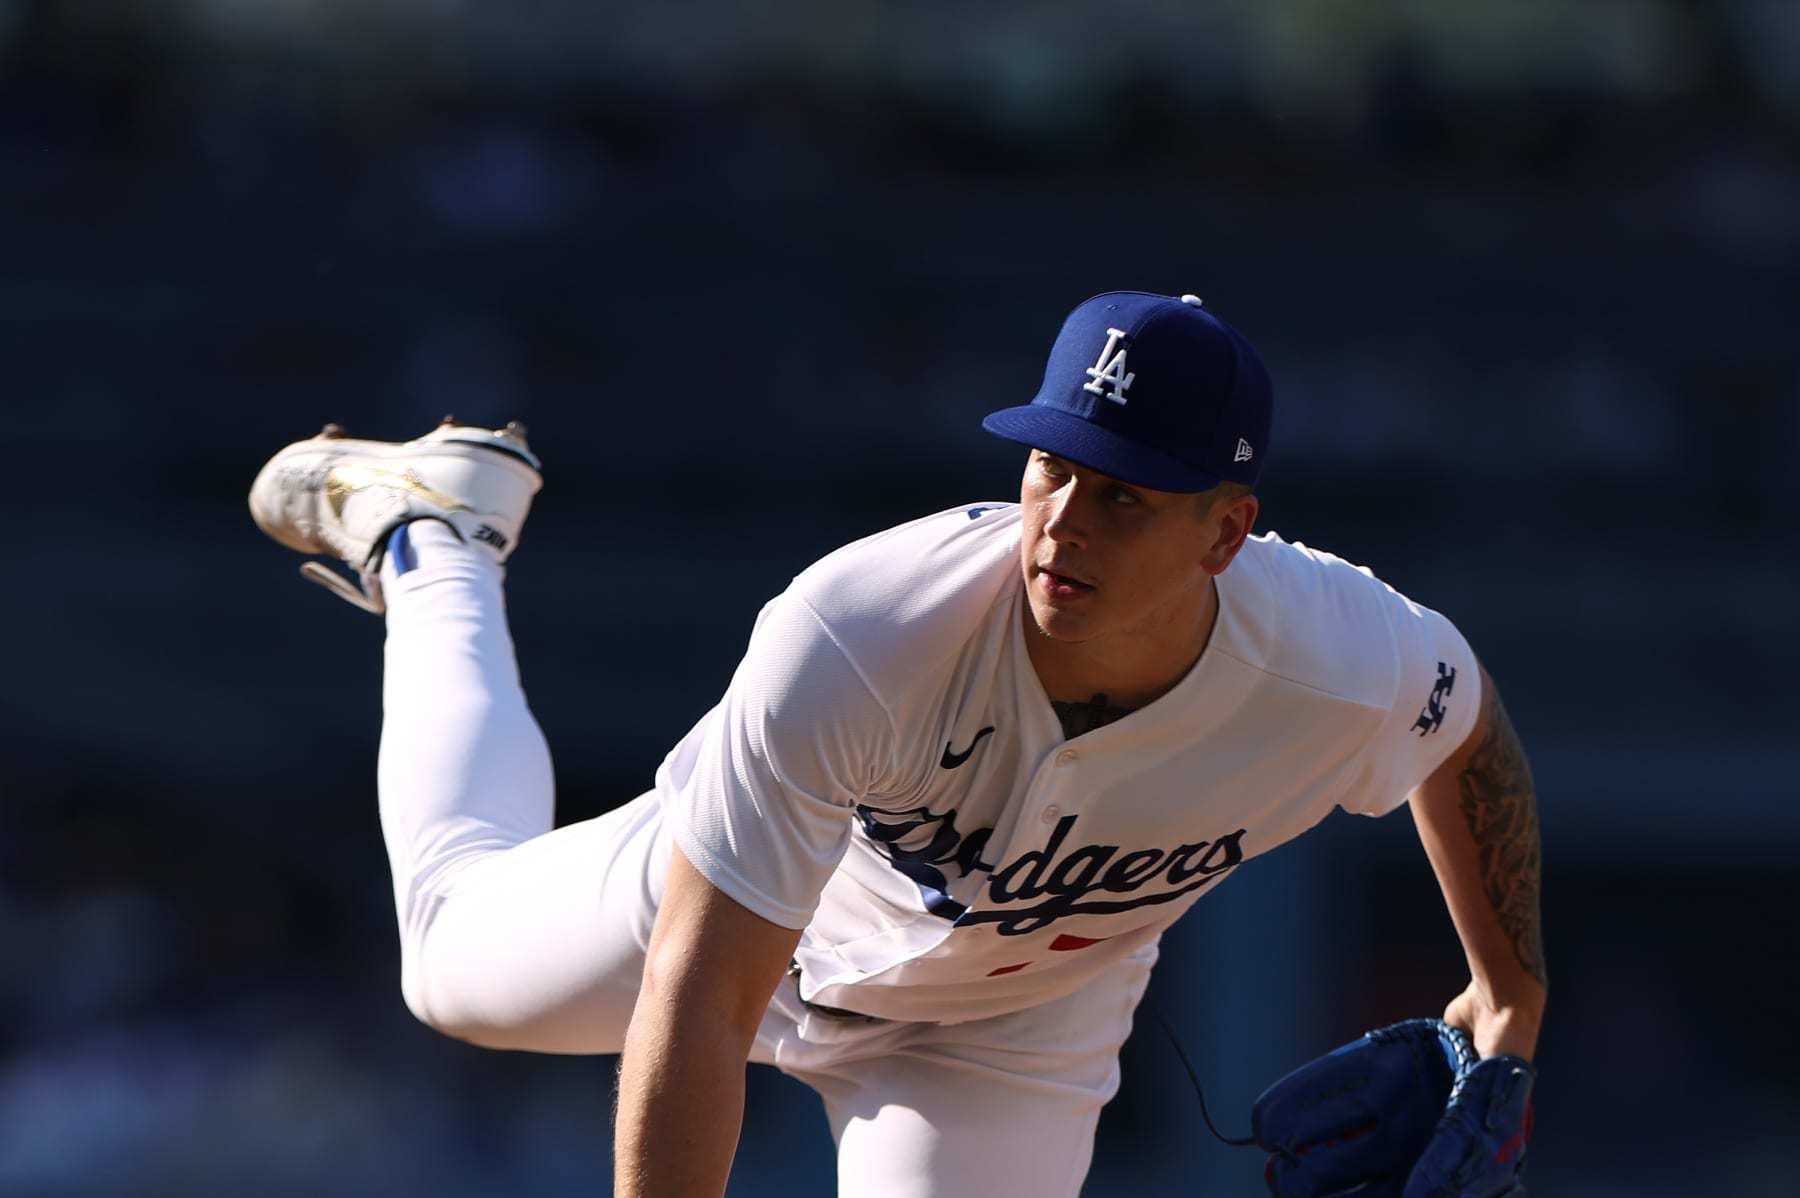 Dodgers Prospect Notes: Vargas streaking, Sheehan tuning up